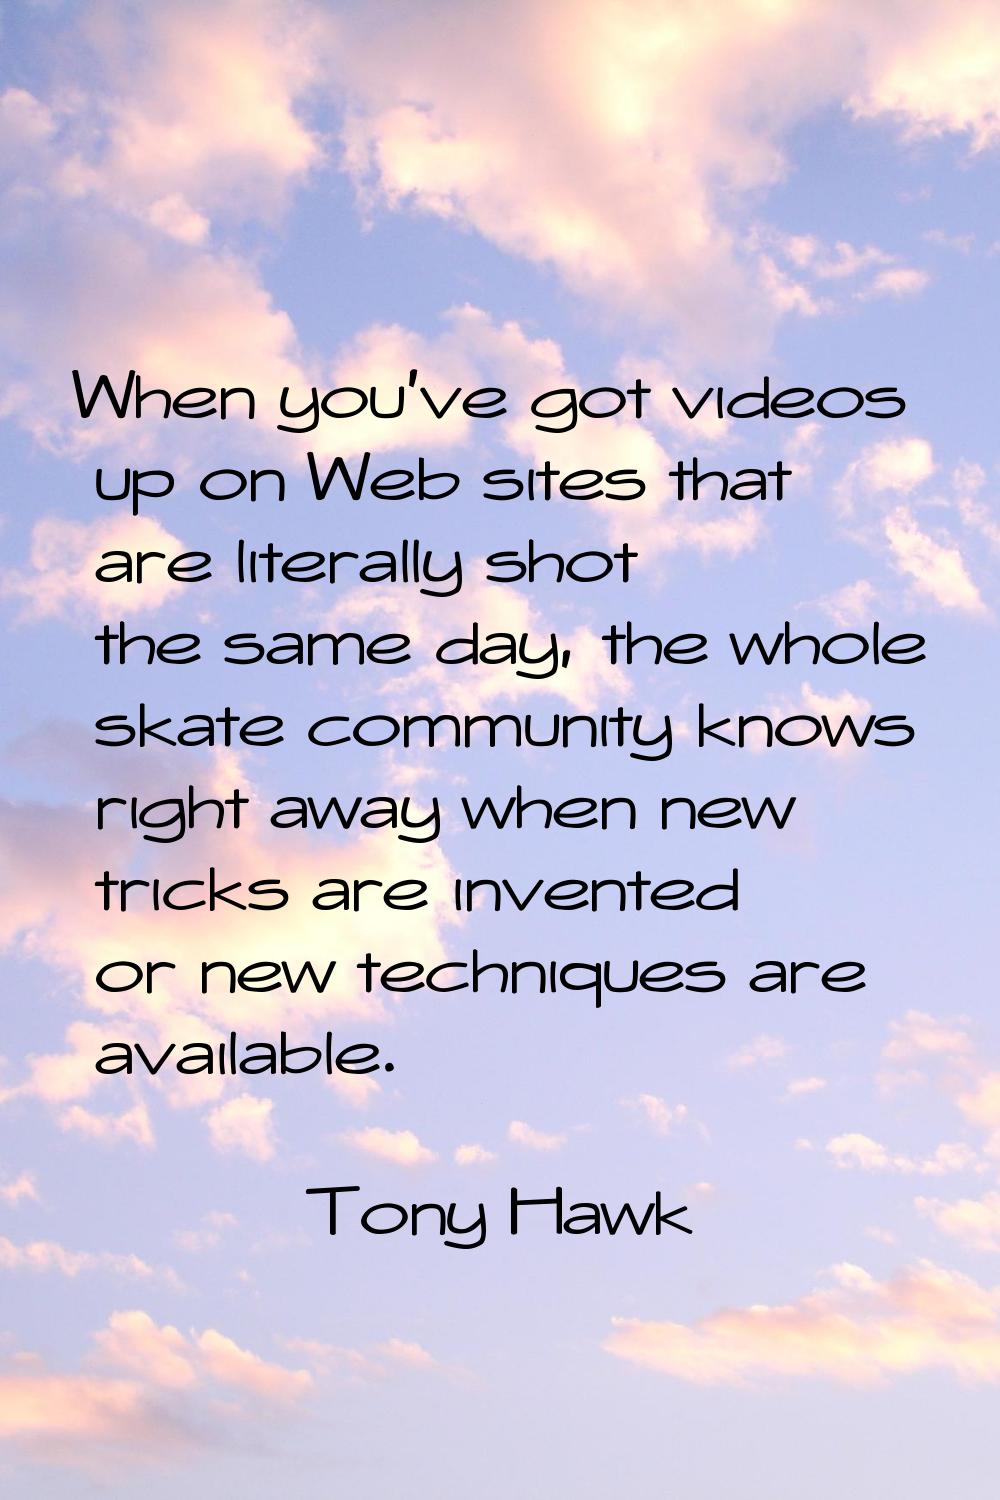 When you've got videos up on Web sites that are literally shot the same day, the whole skate commun